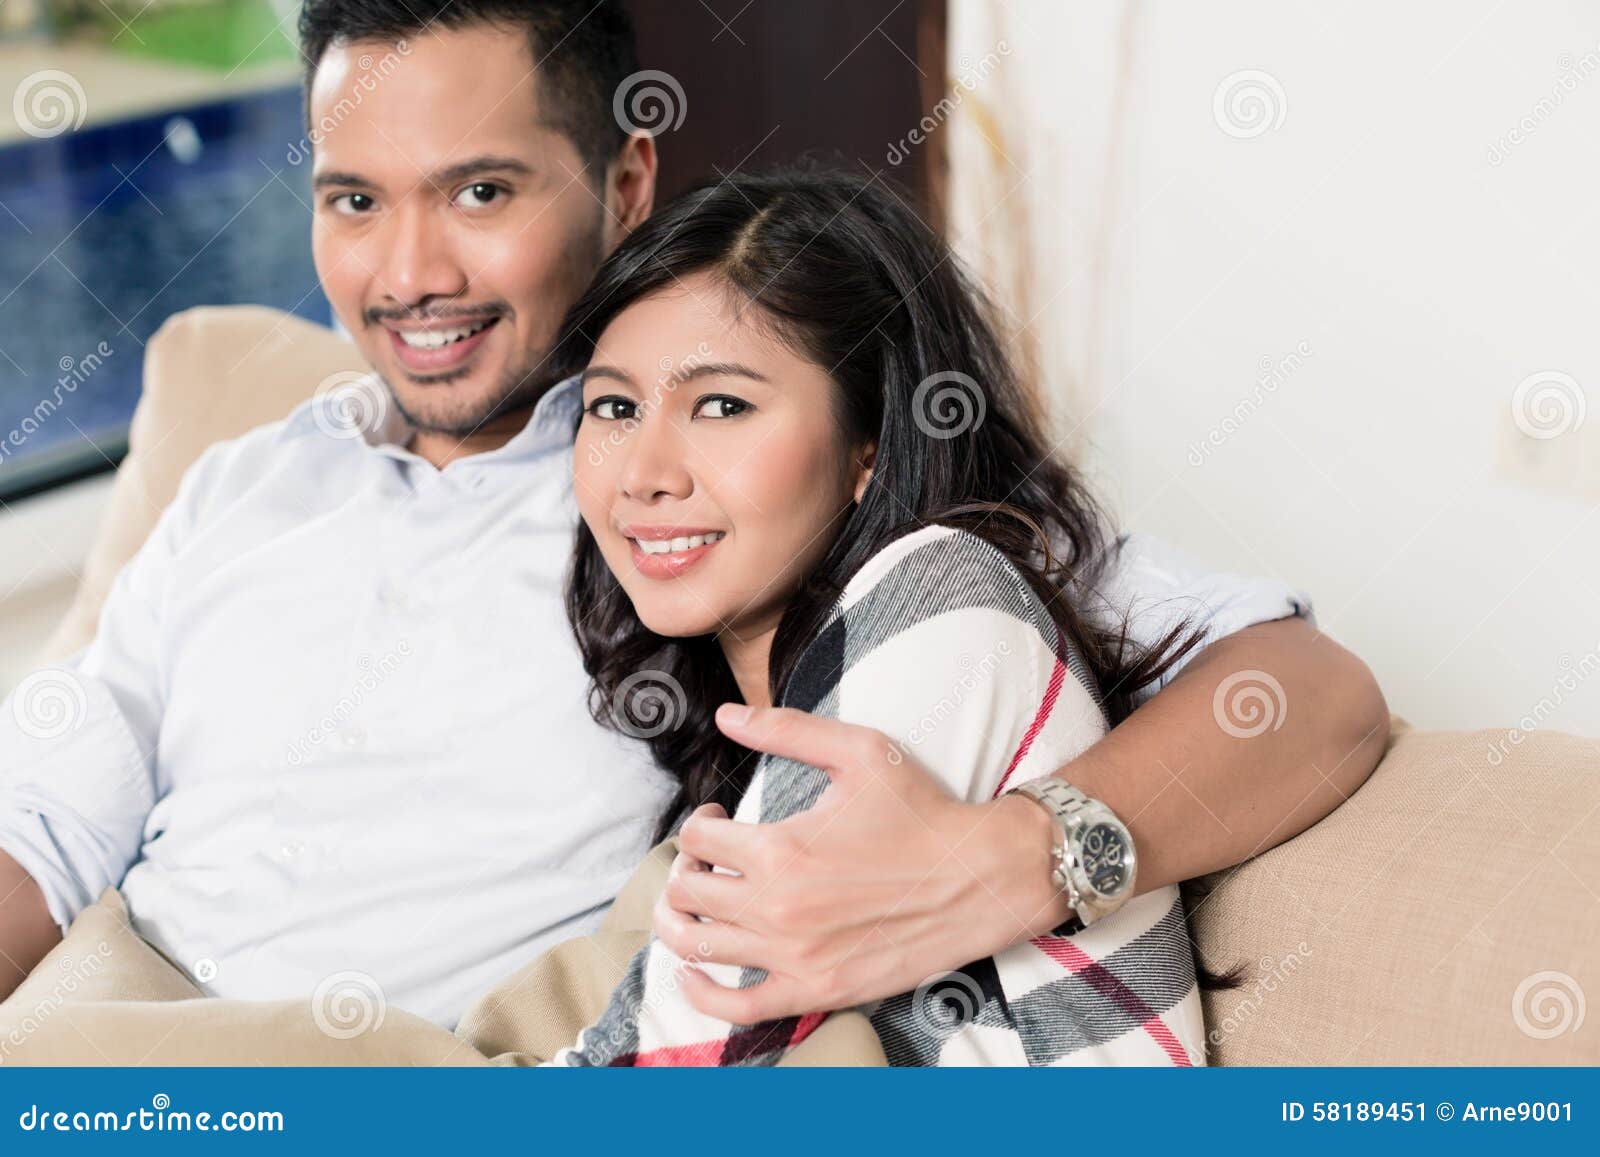 Asian Couple Cuddling On Sofa In Living Room Stock Image I